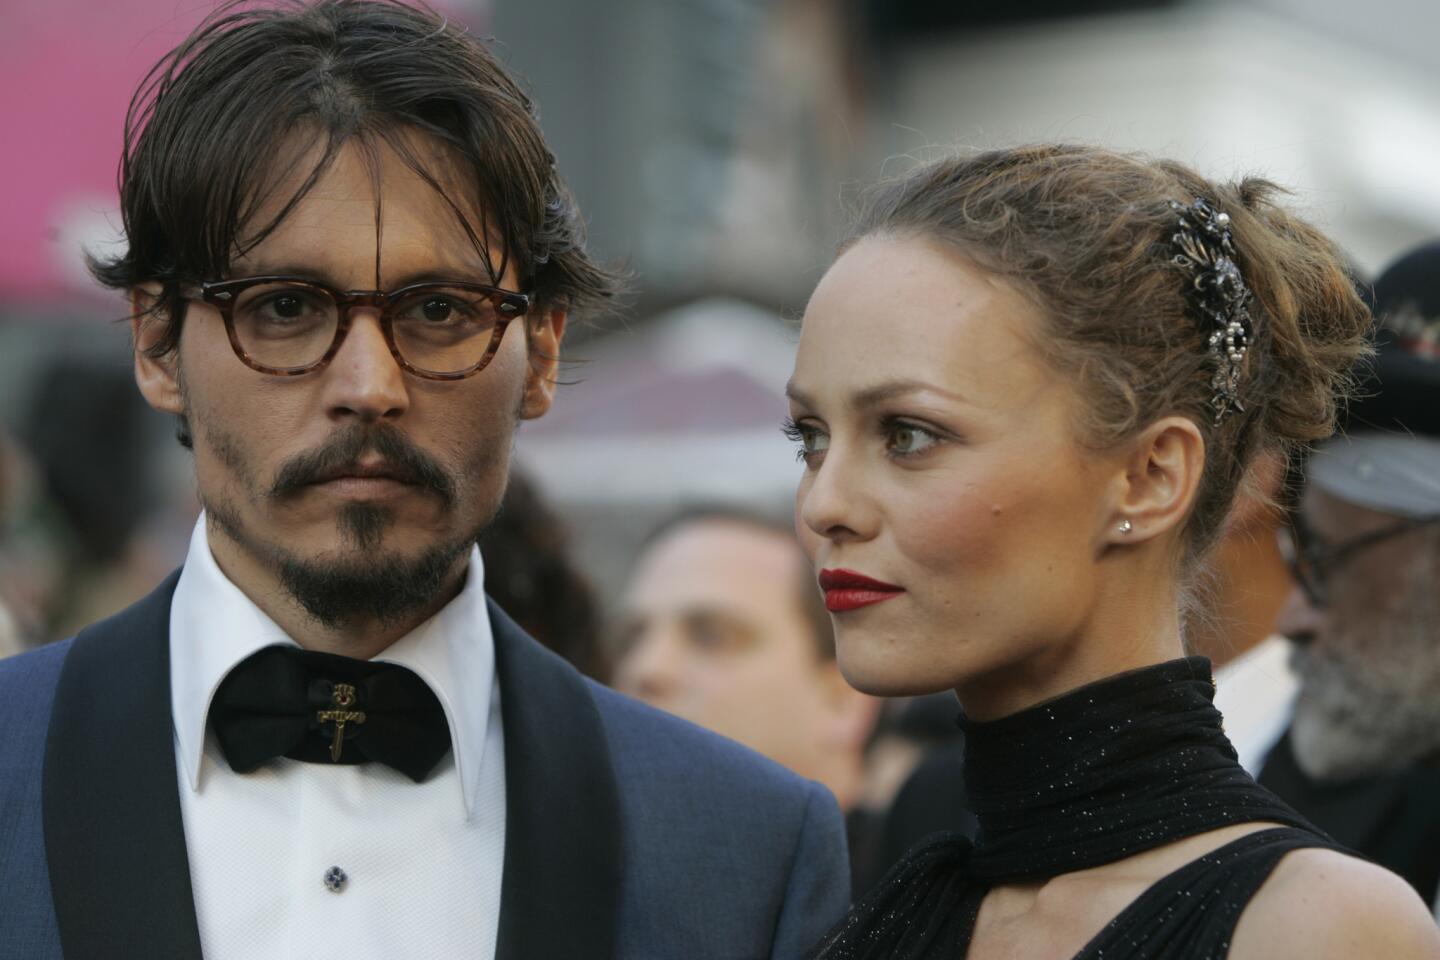 Johnny Depp: Life in pictures